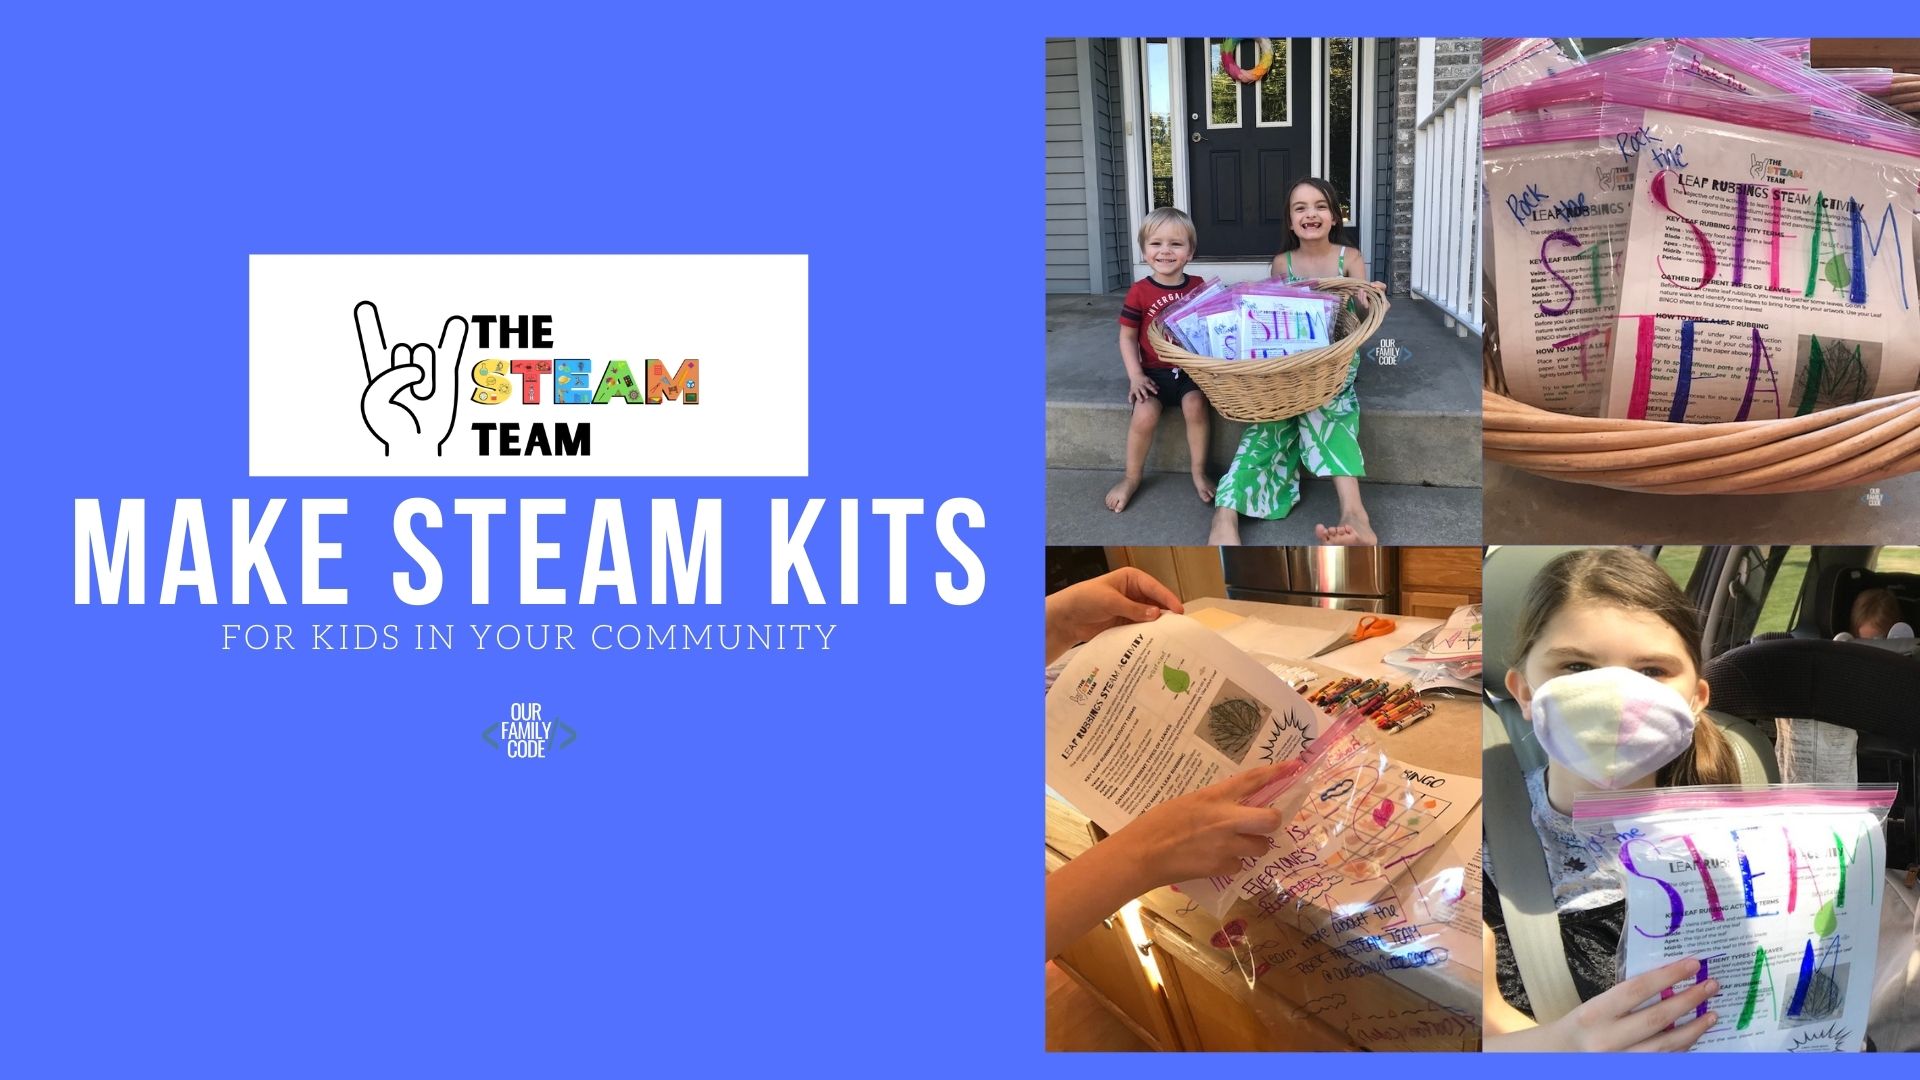 This civic project encourages communities to ensure equal education and personalized learning by making and delivering remote learning STEAM kits to kids in our community!